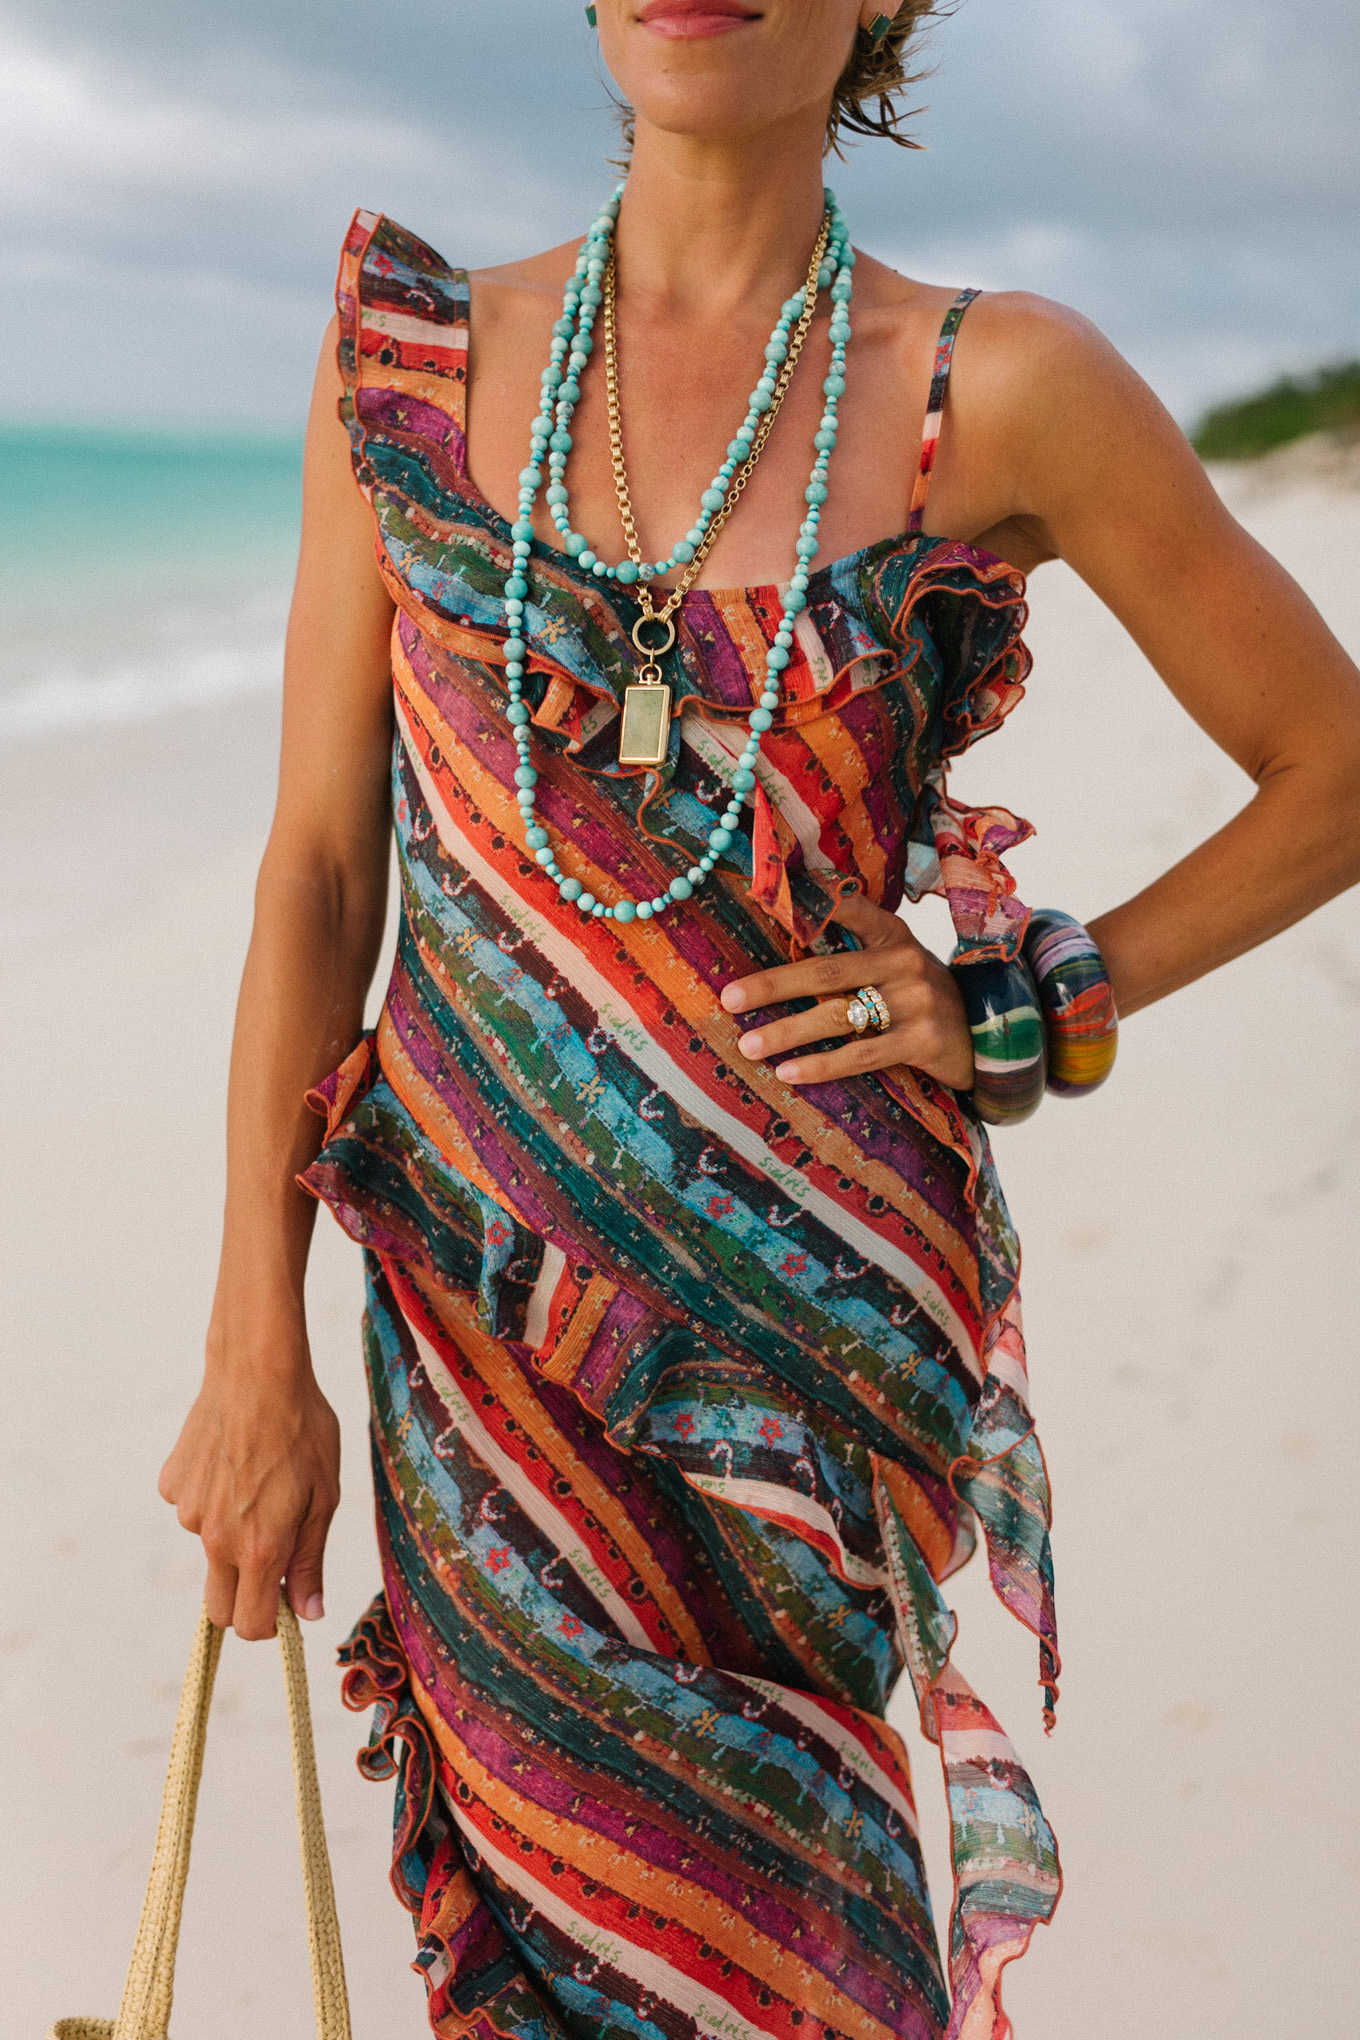 Rainbow Striped Ruffle Maxi Dress Turquoise Beaded Necklace Woven Bag